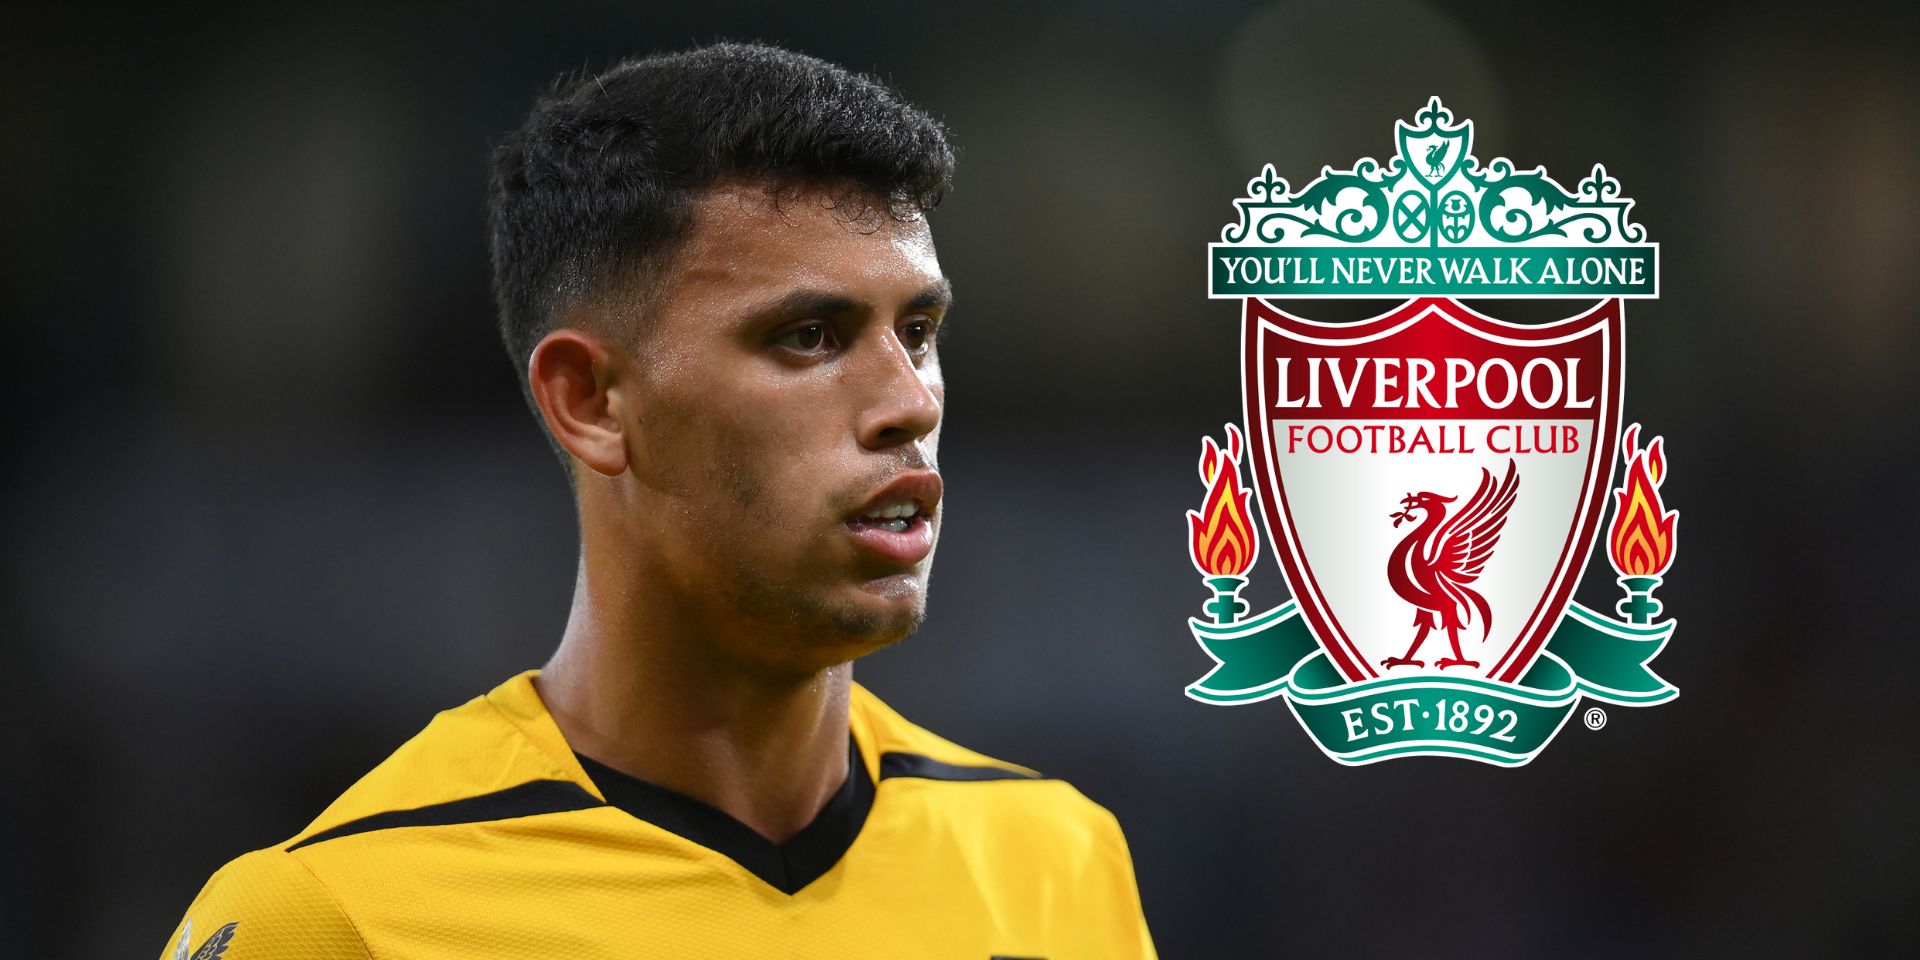 Liverpool maintain high interest in PL midfielder valued at ‘more than £50m’ by parent club – Sky Sports